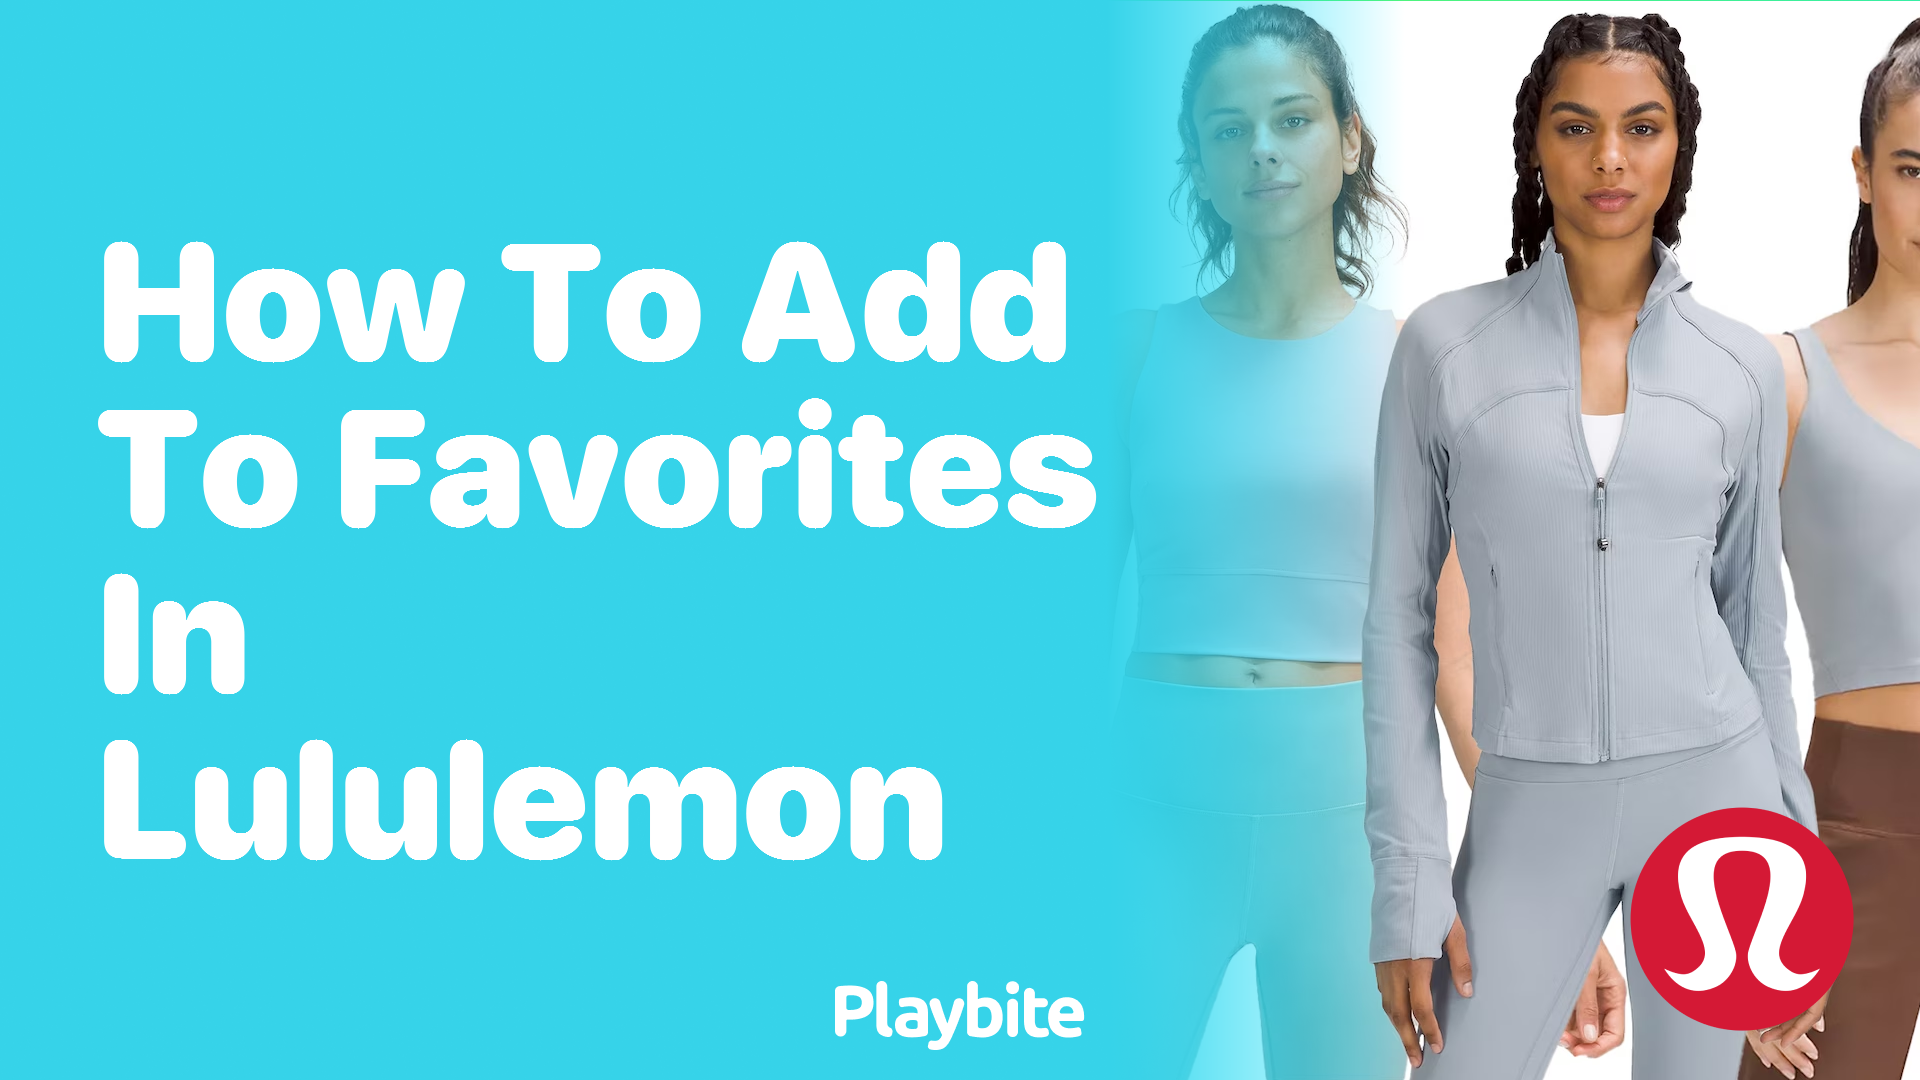 How Many Types of Sports Bras Does Lululemon Have? - Playbite